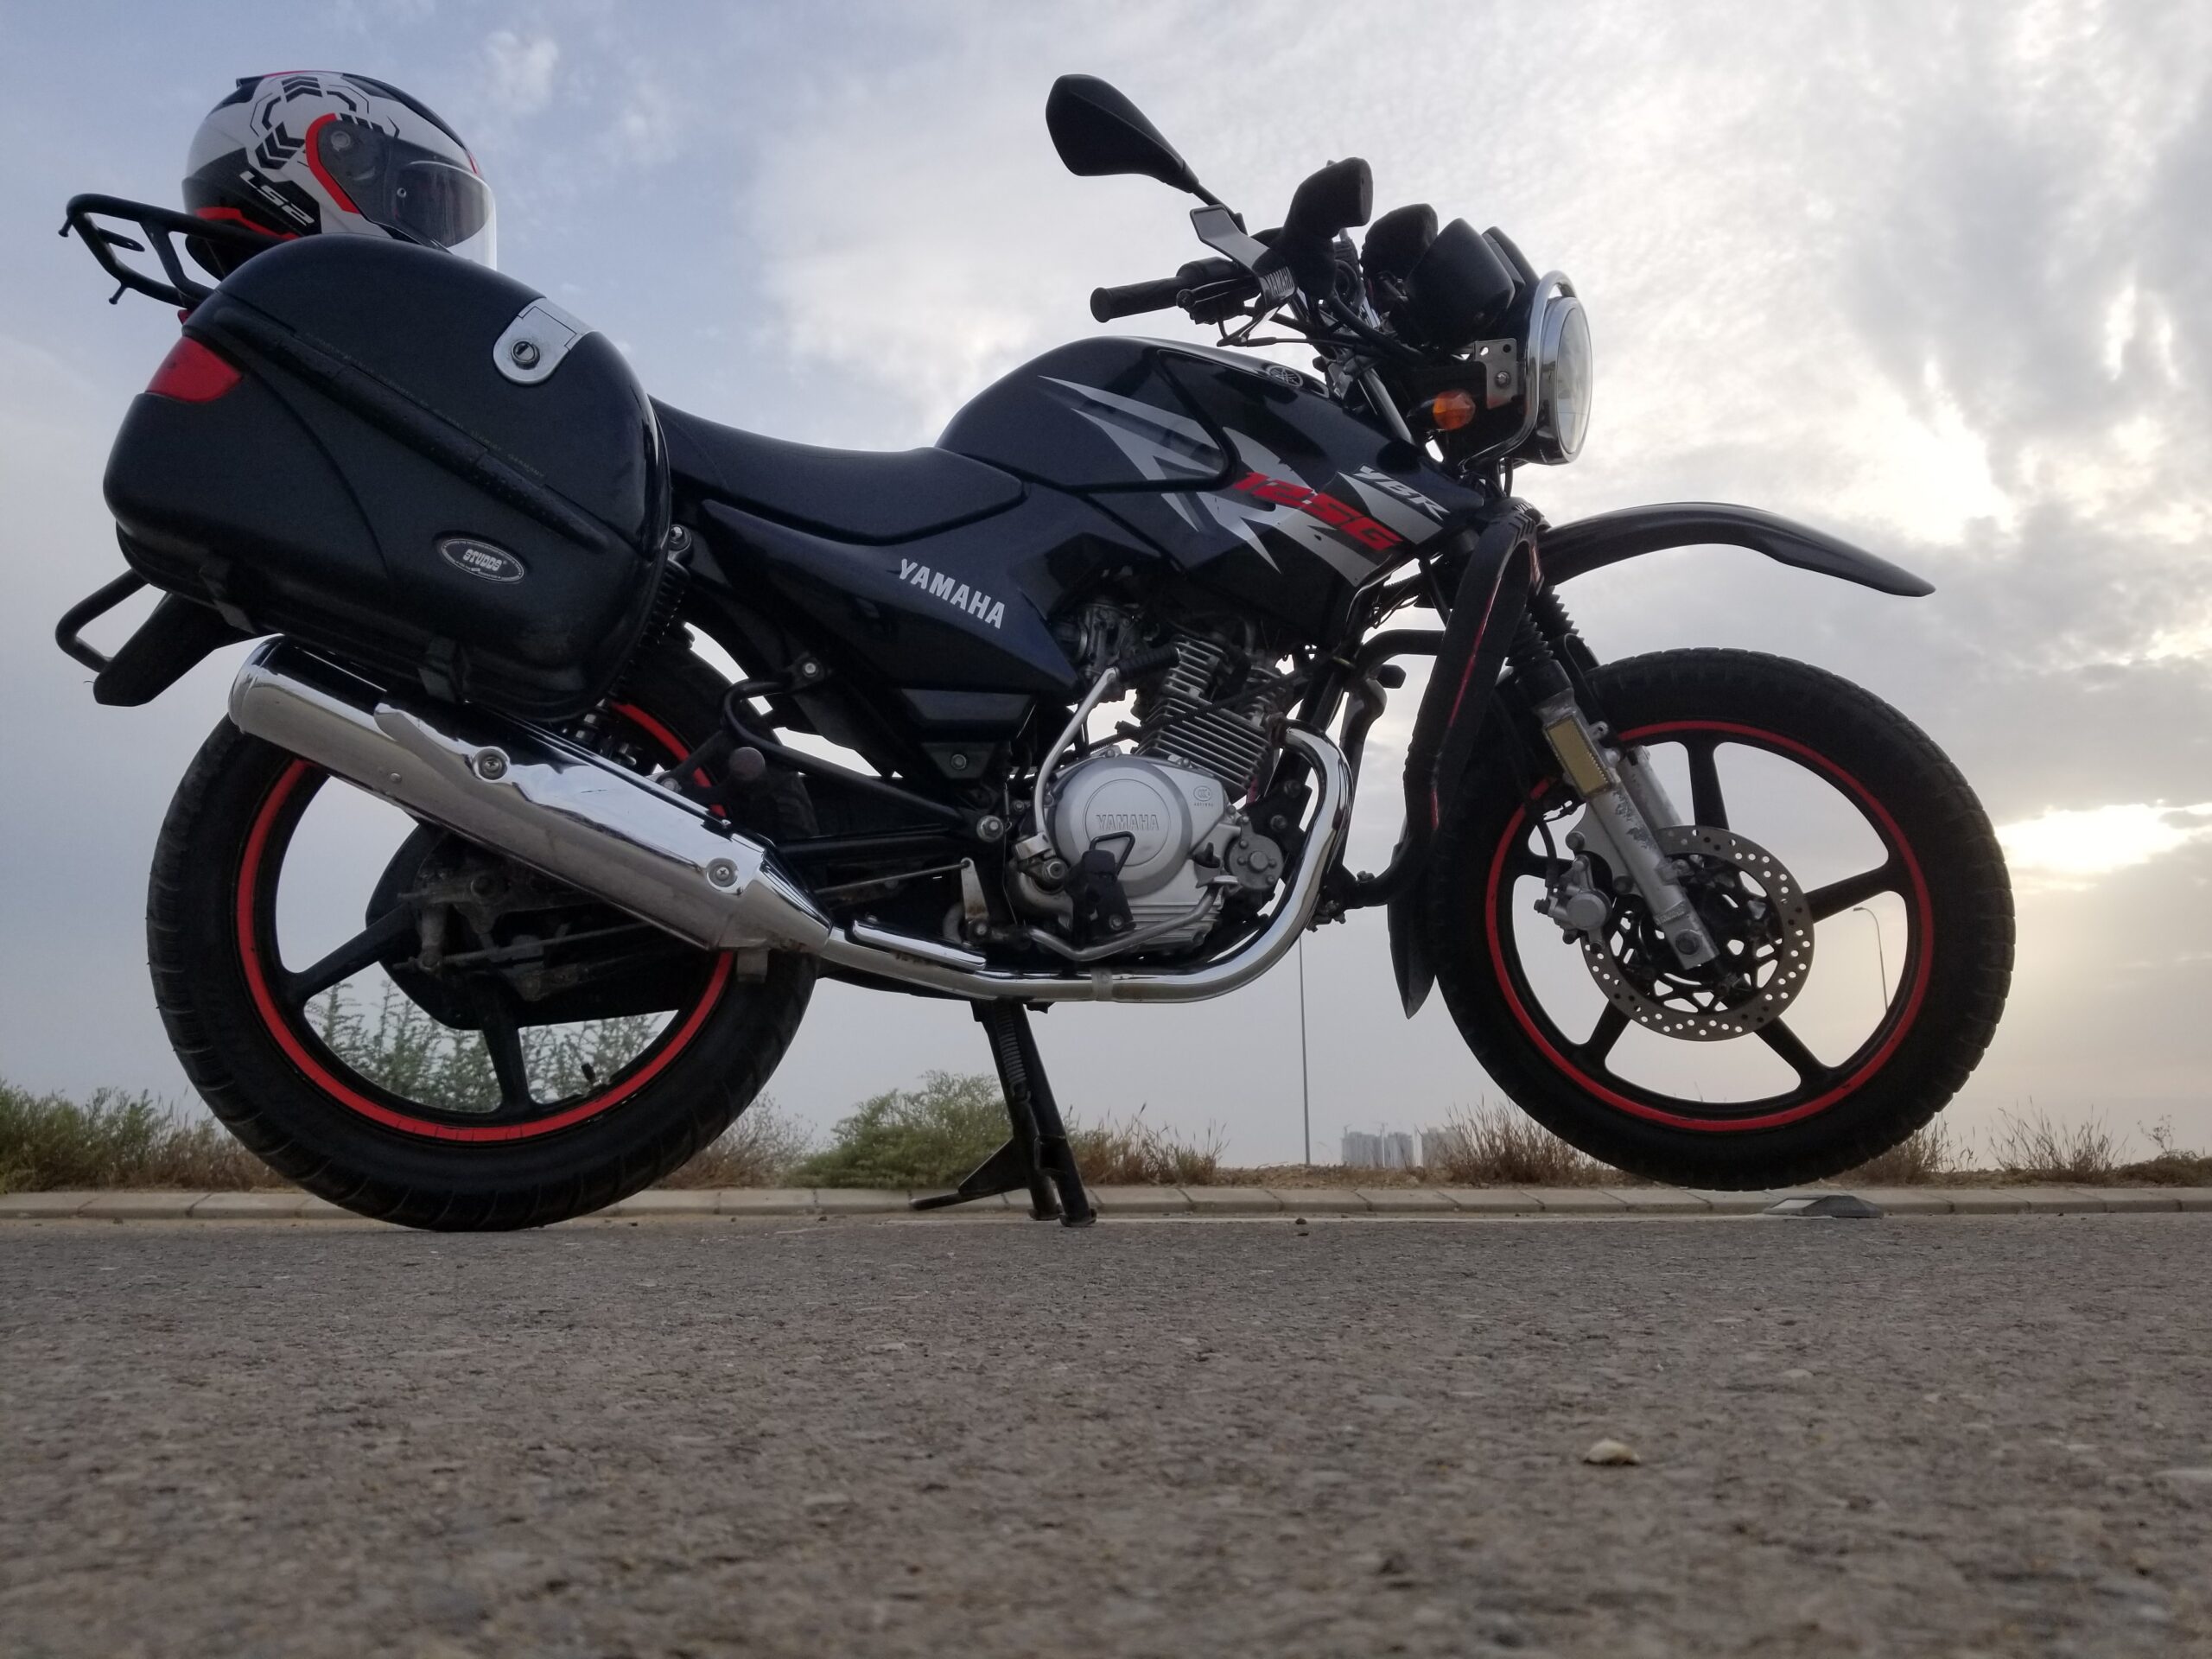 Yamaha YBR 125G Specifications and Prices in Pakistan